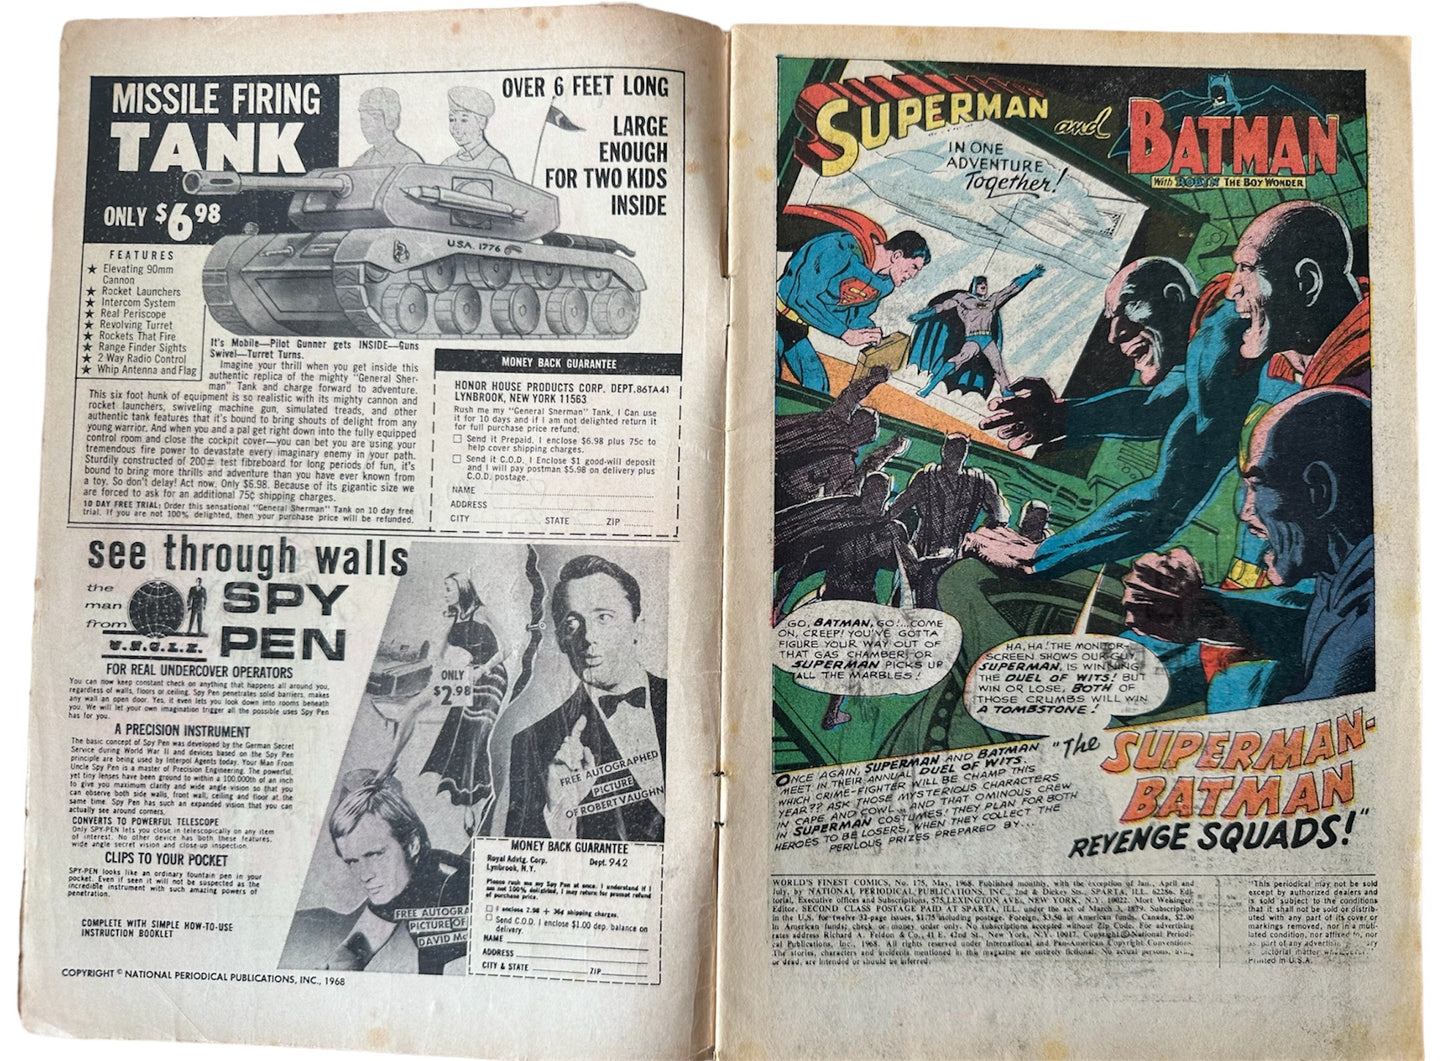 Vintage 1968 DC Worlds Finest Comics Issue Number 175 Starring Superman And Batman With Robin The Boy Wonder - Very Good Condition Vintage Comic